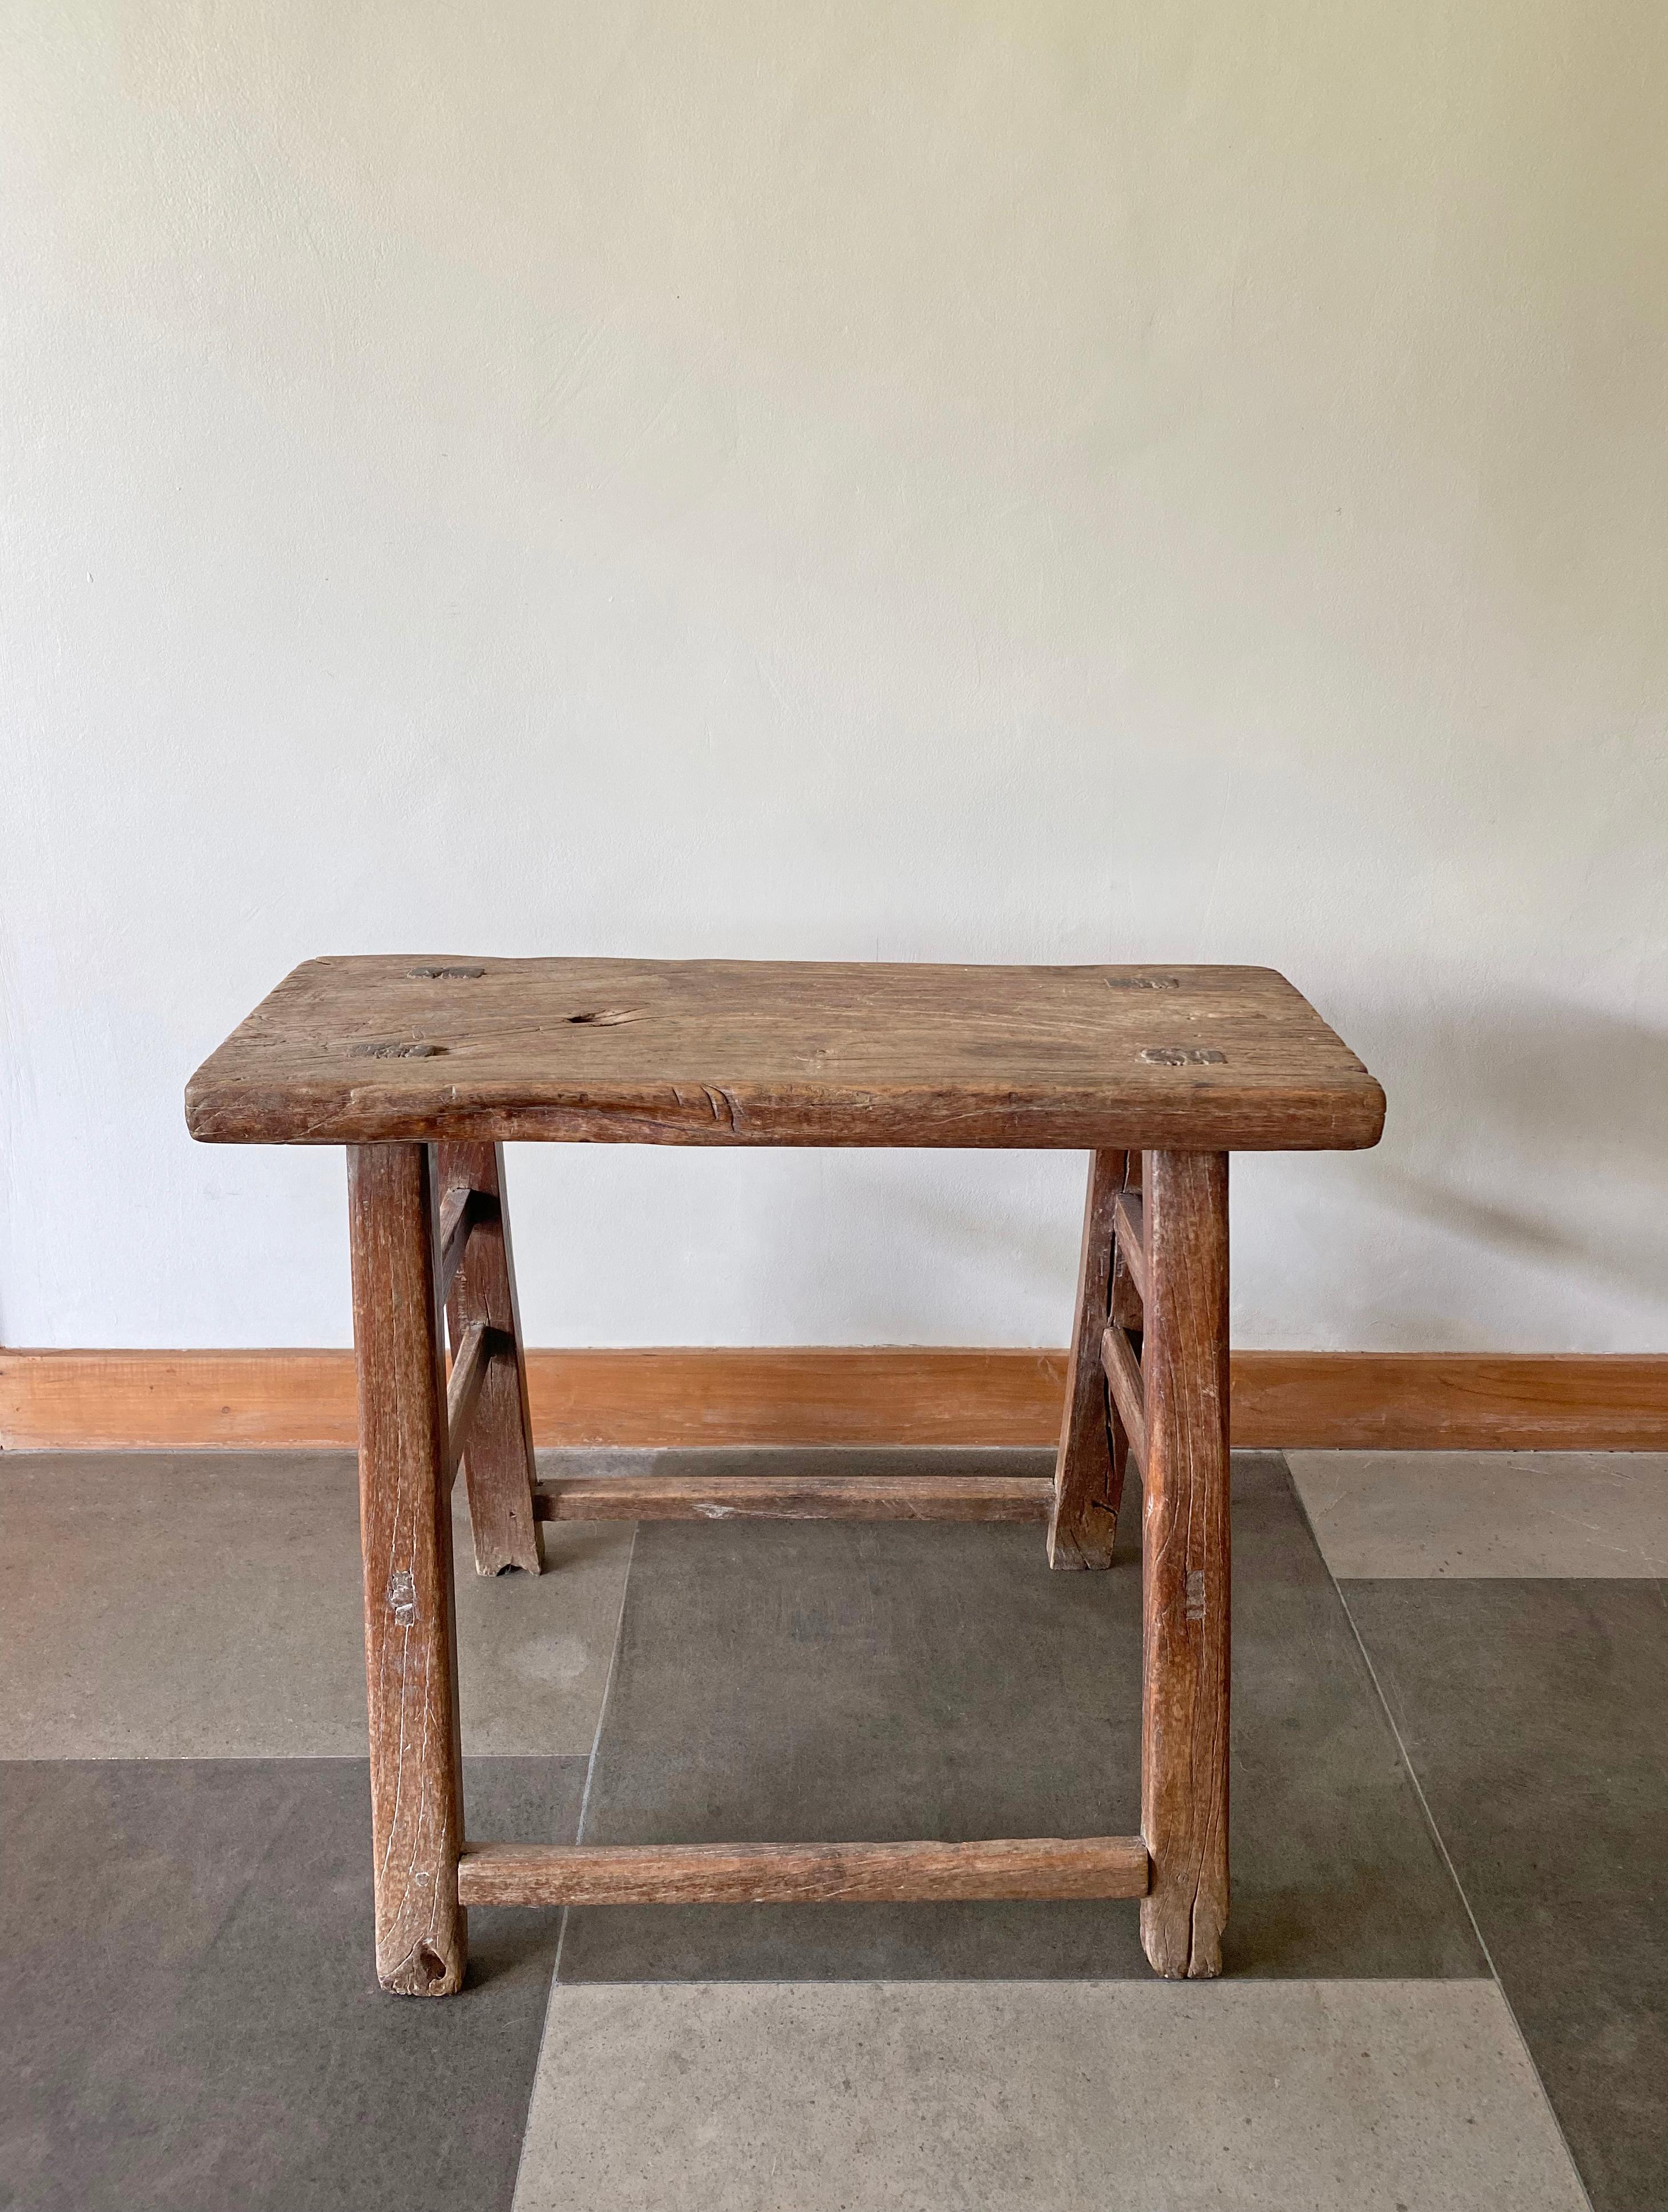 This antique elm wood stool comes from China's Hubei province. It was crafted using only wooden joints. The elm wood has aged beautifully over its more than 100 years of life. 

Dimensions: Height 58cm x width 67.5cm x depth 26cm.
  